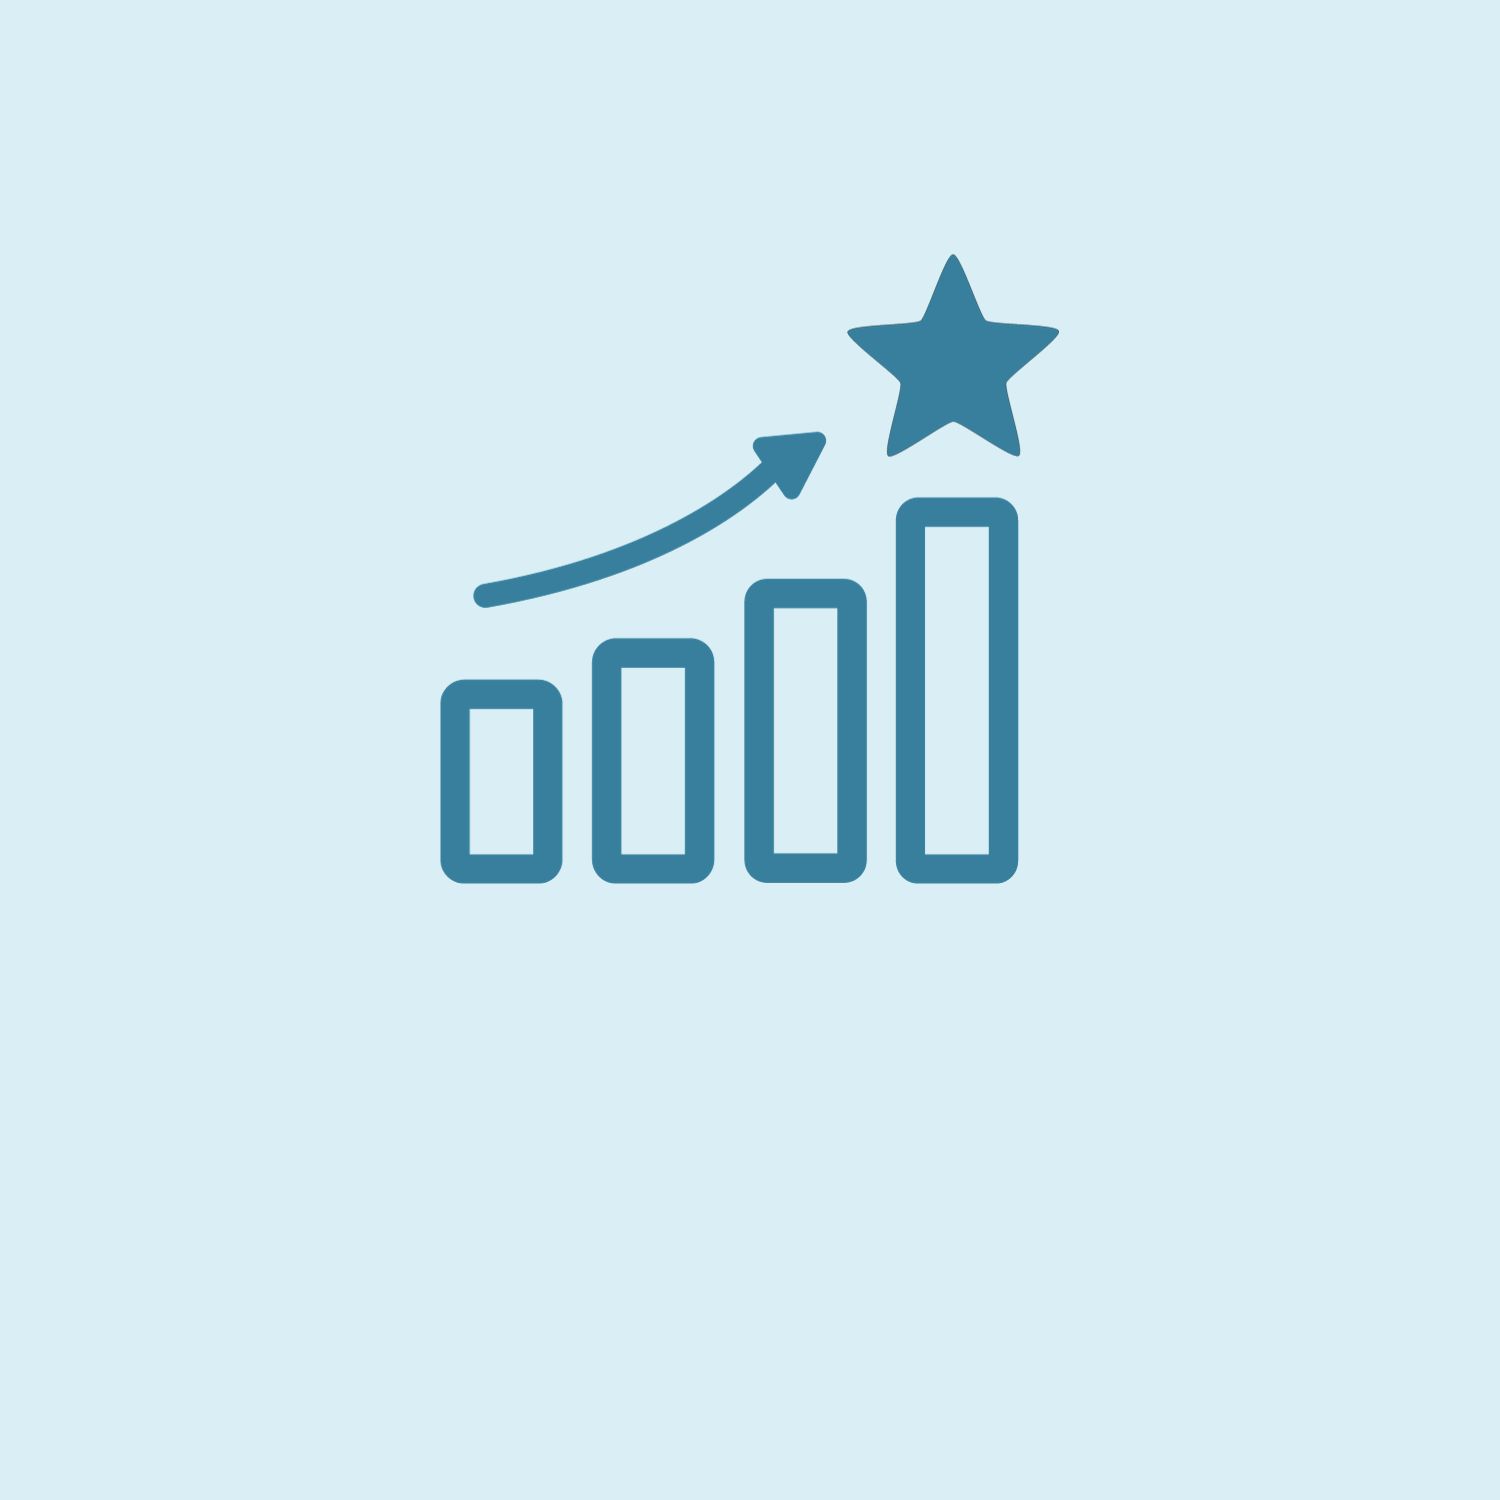 blue graph icon with star